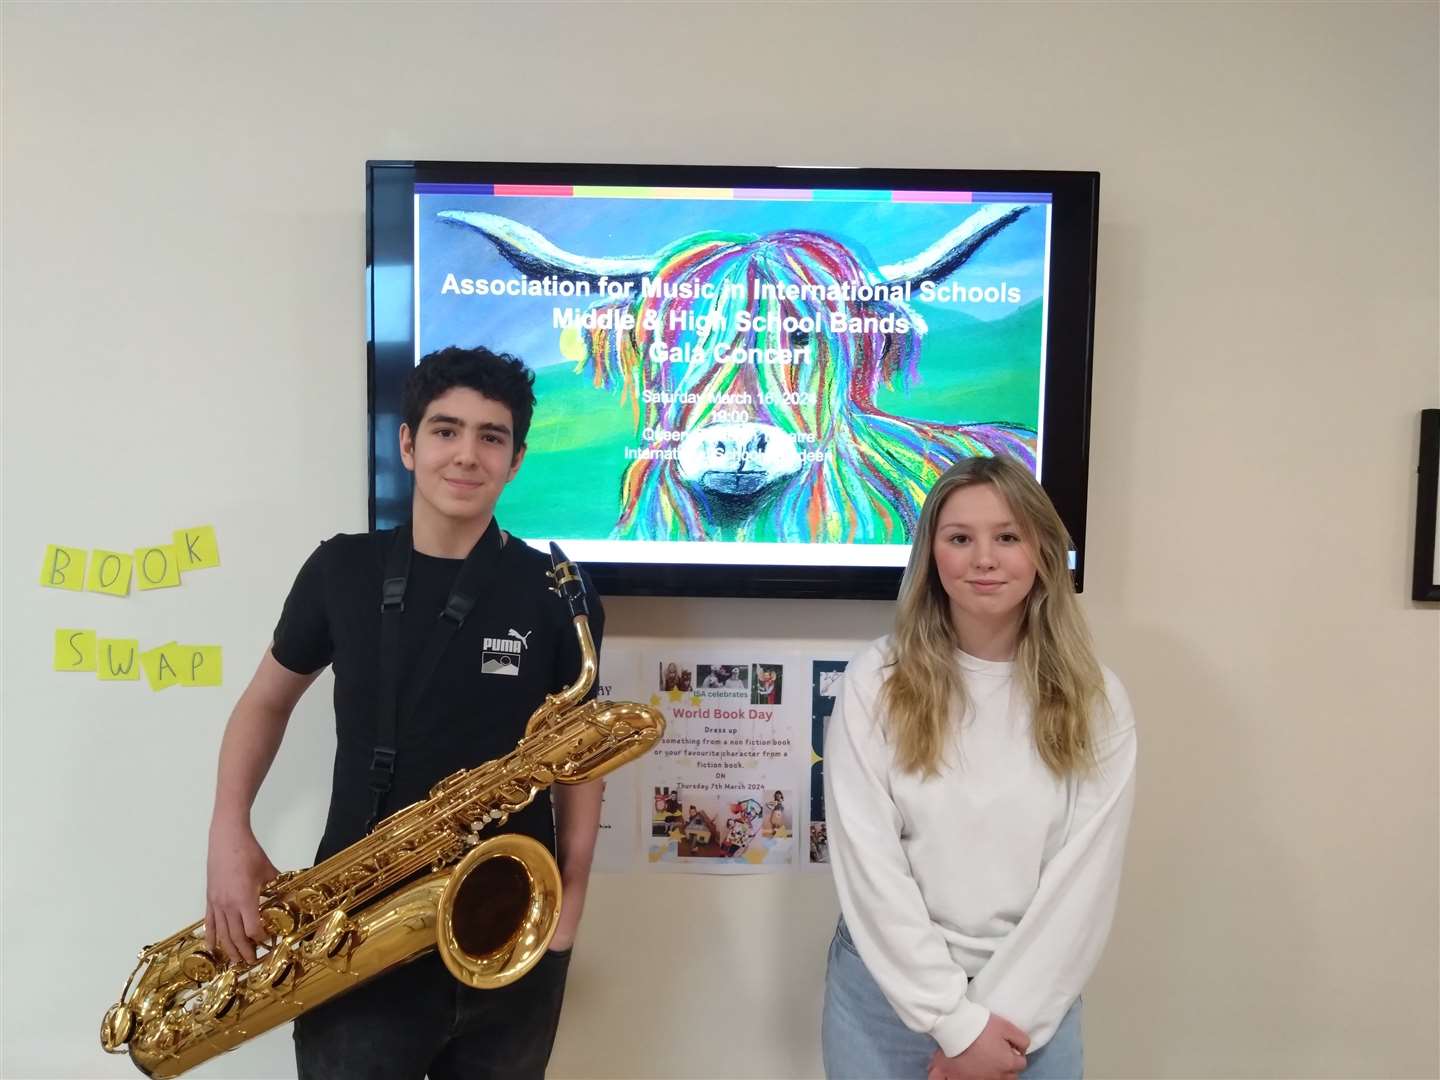 Aberdeen musicians Karim Kudhr, baritone saxophone, and Matilda Brazier, vocalist, who will be performing as part of the AMIS Gala Concert with Alford Academy Pipe Band at ISA this weekend.